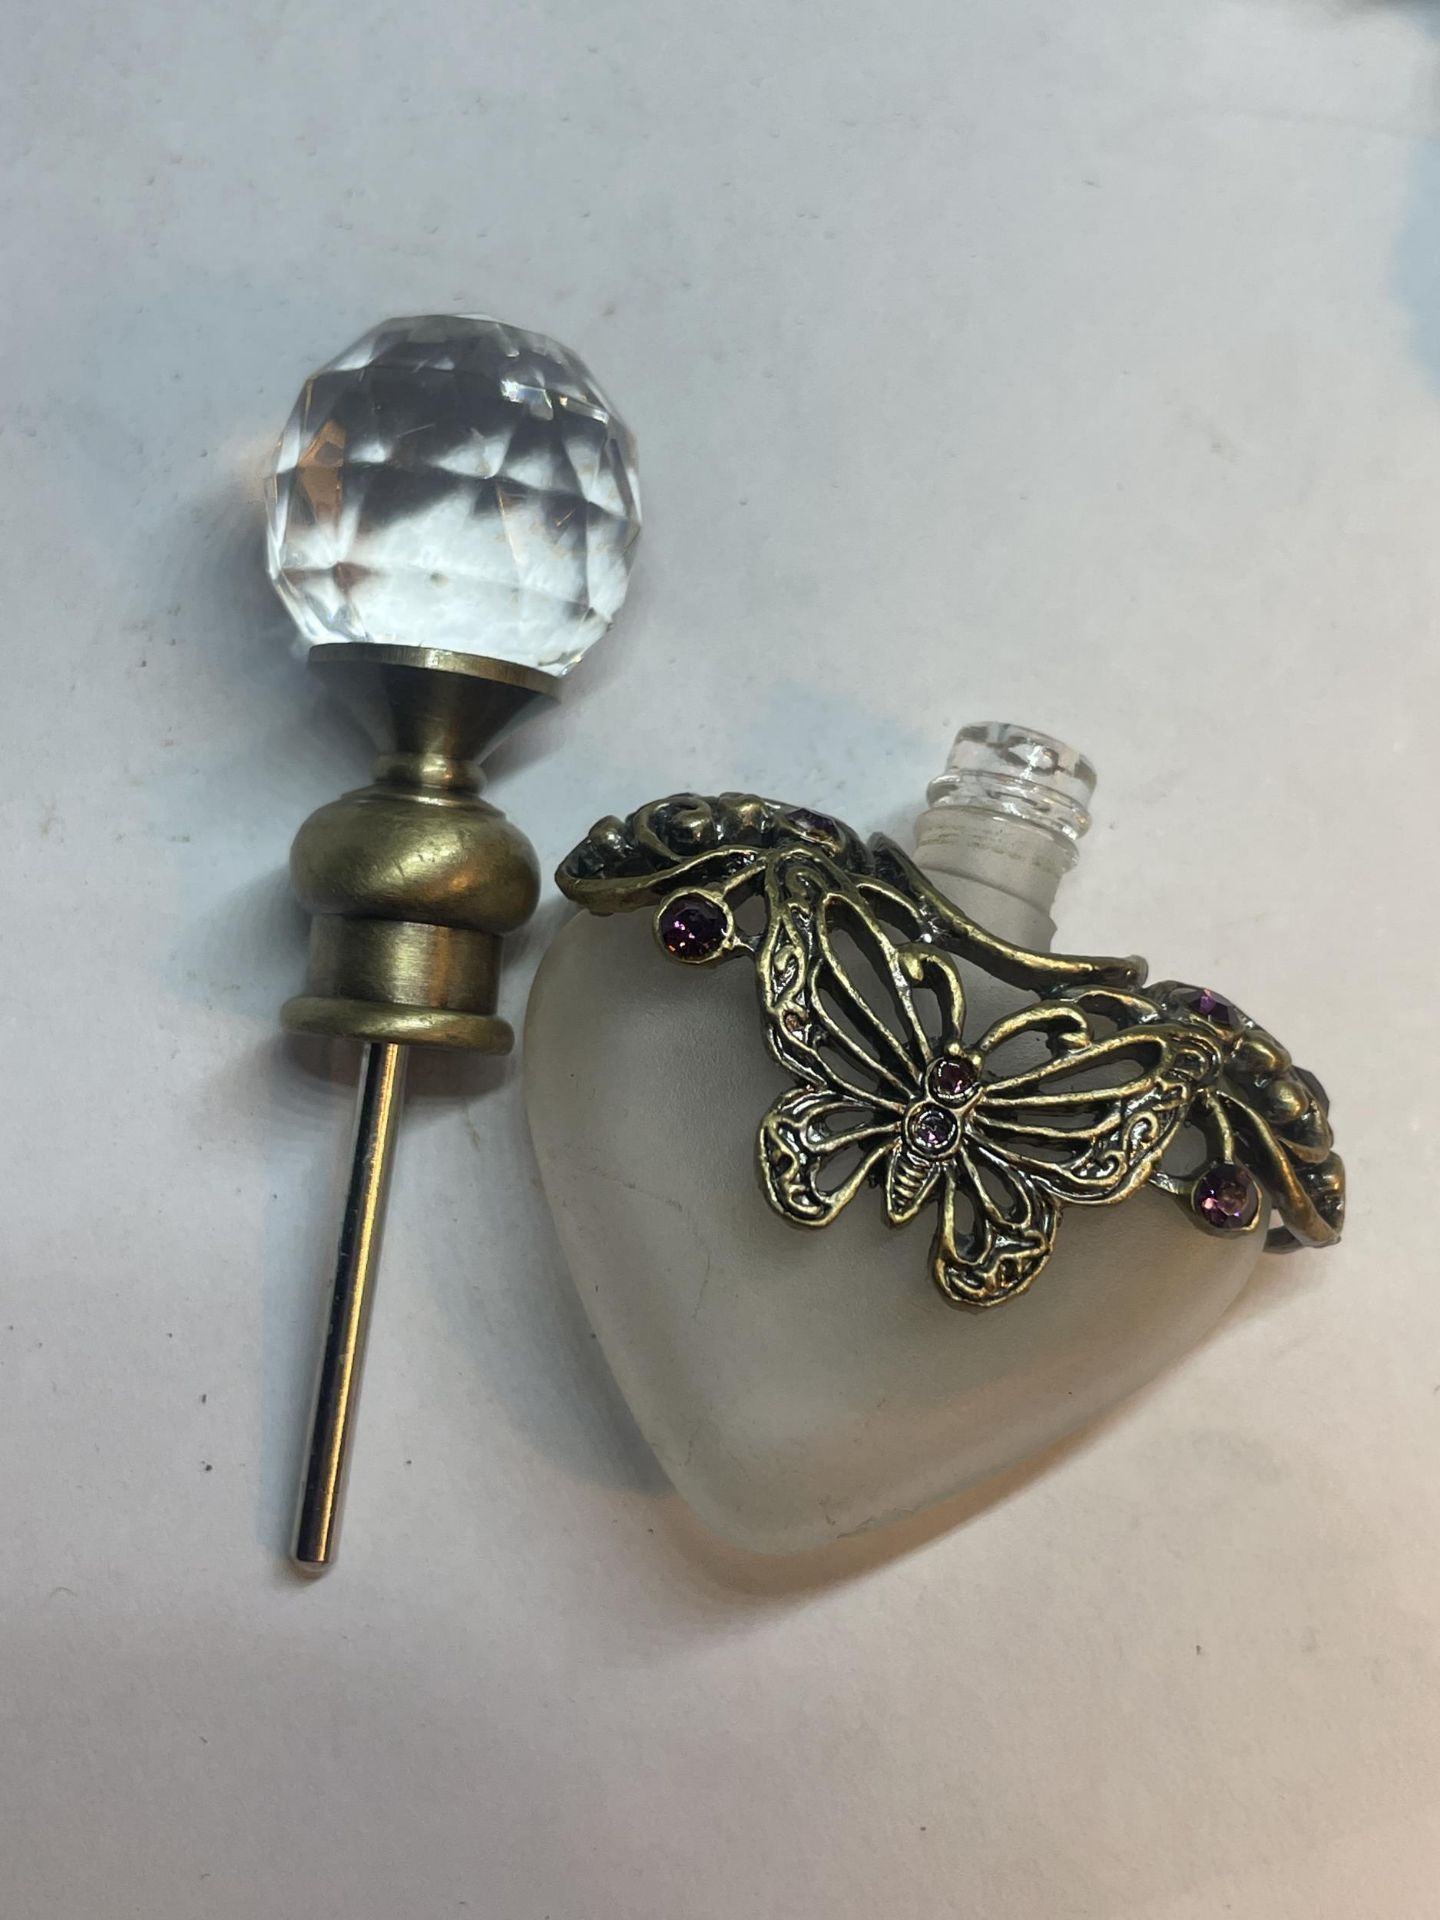 TWO GLASS PERFUME BOTTLES WITH METAL BUTTERFLY DESIGN - Image 4 of 4